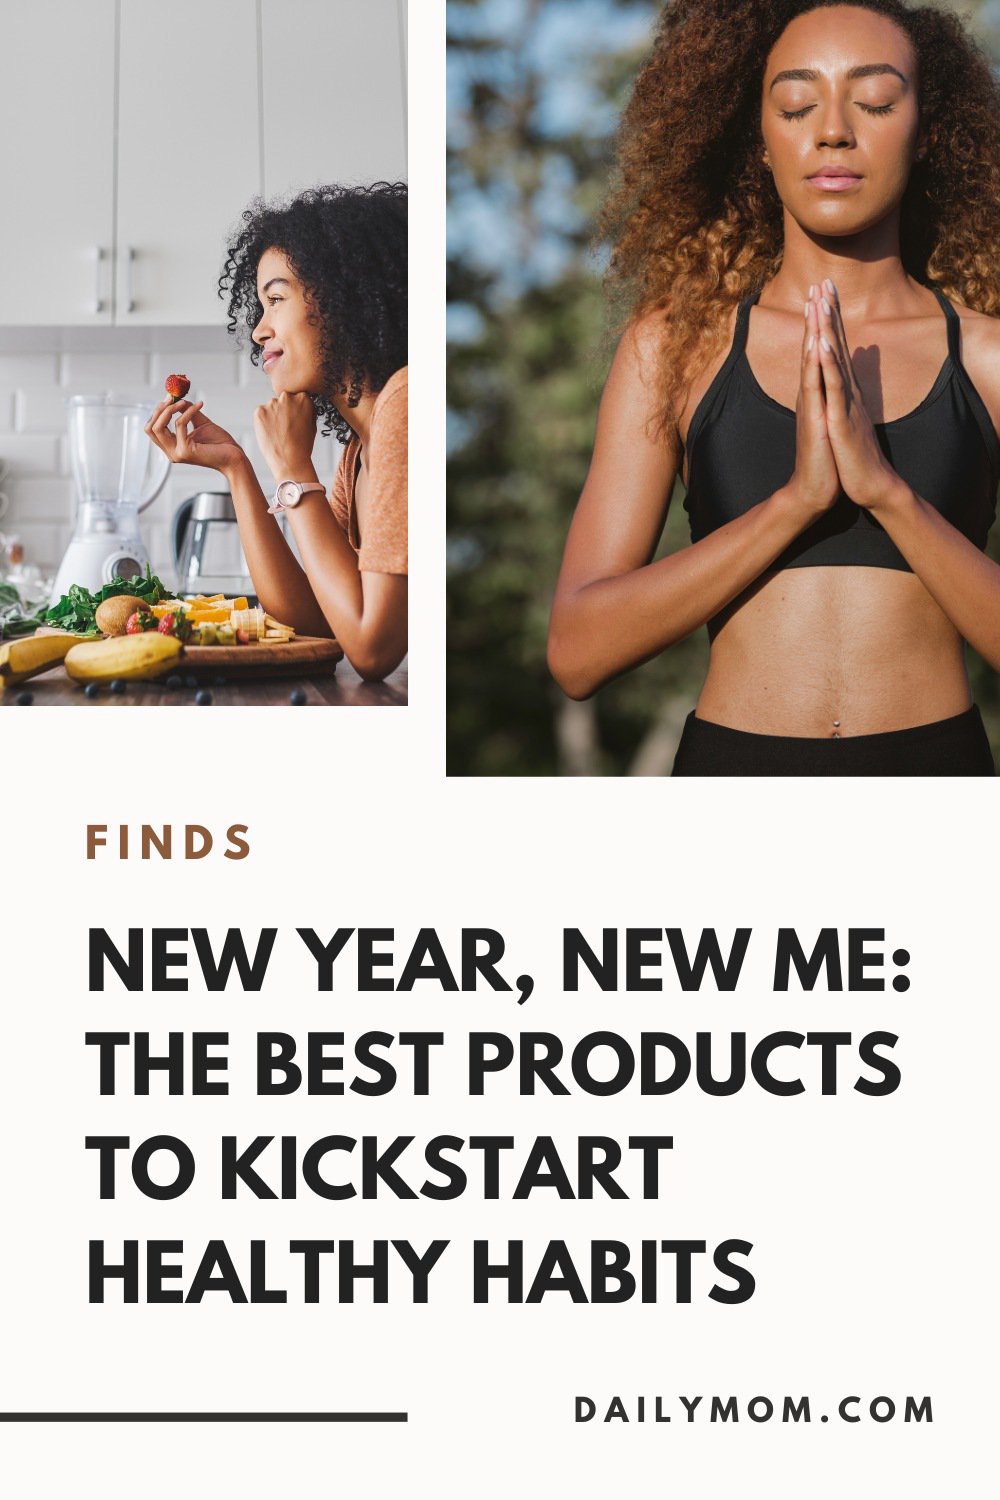 New Year New Me: 25 Of The Best Products To Kickstart Healthy Habits 